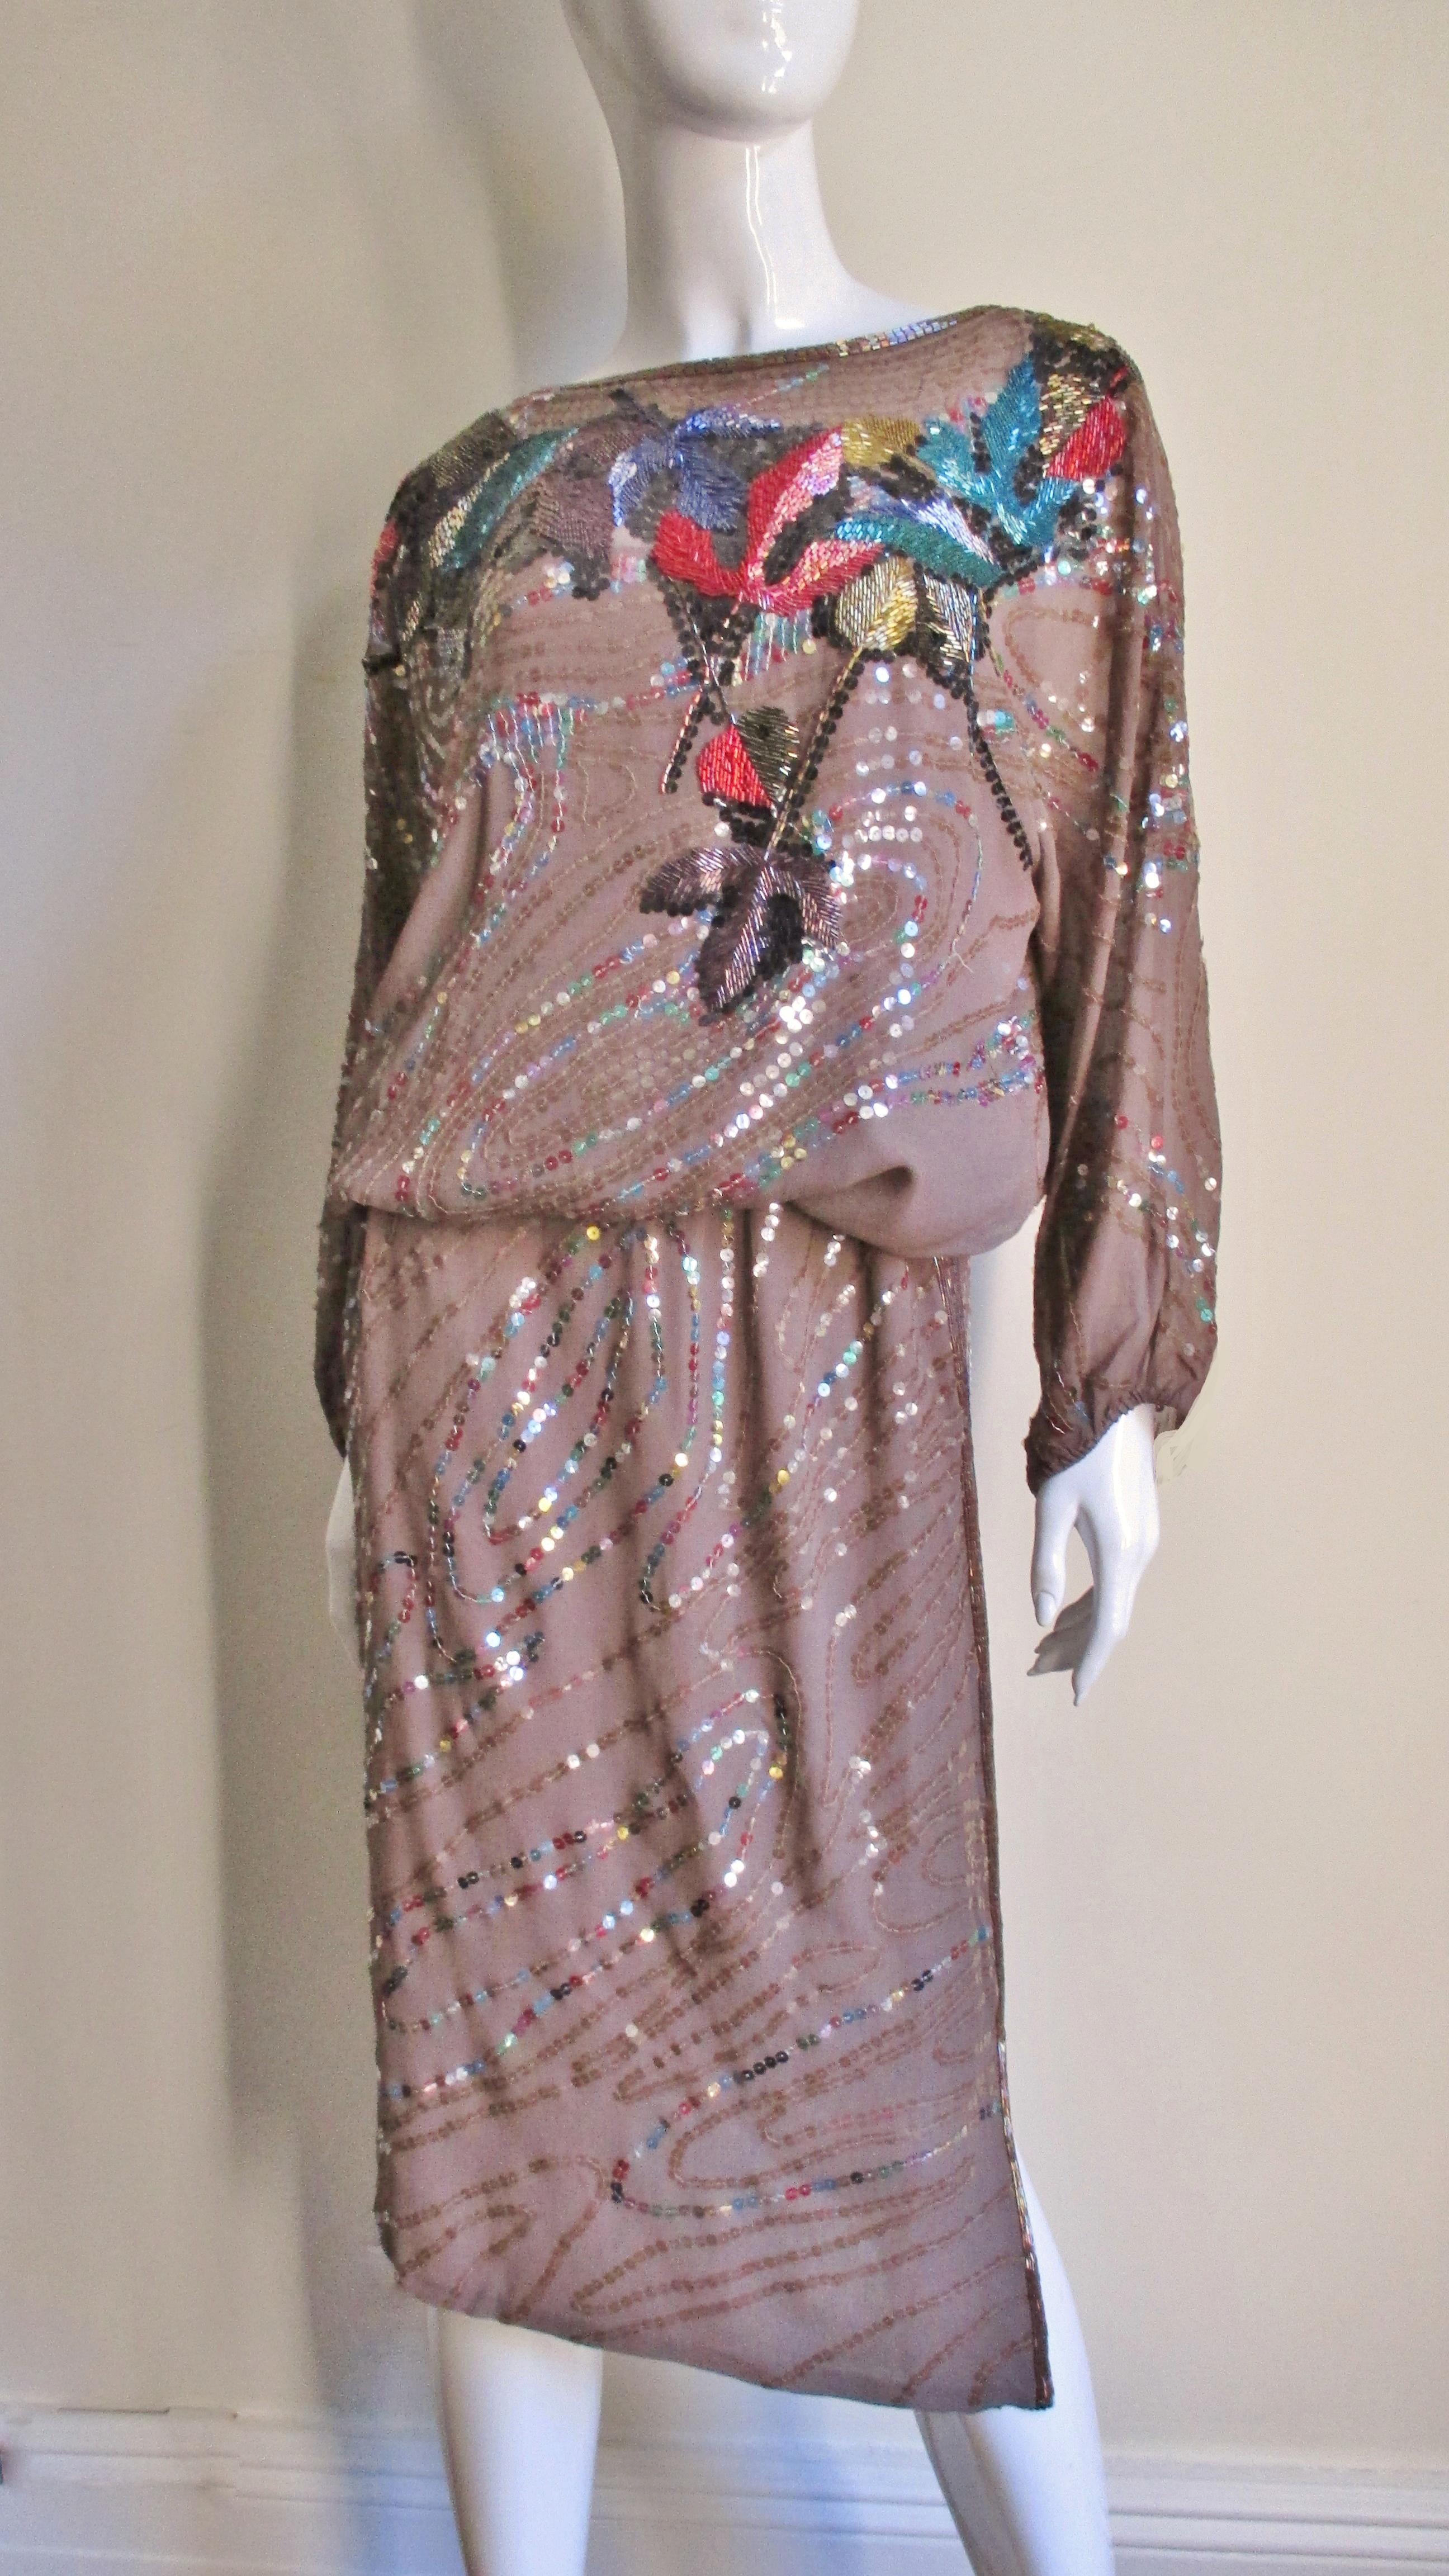 A gorgeous 2 piece tan silk top and skirt set from designer Neil Bieff.  It is adorned with an abstract pattern of sequins and glass beads created by world renowned artist Arturo Herrera whose works are exhibited in the Museum of Modern Art among